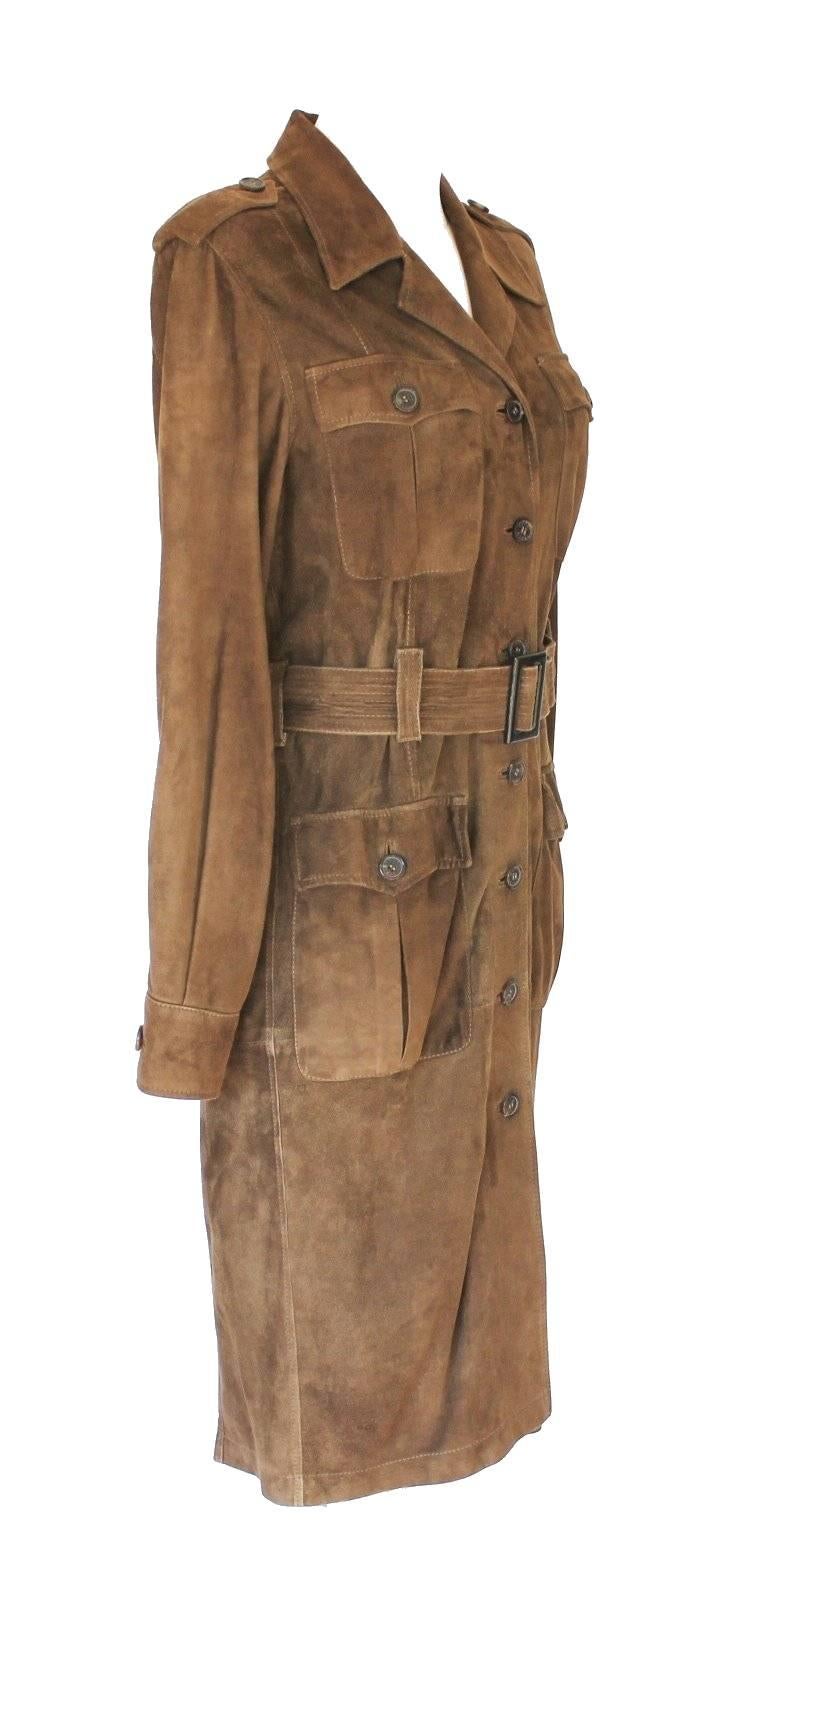 RARE COLLECTOR'S ITEM

GUCCI

GORGEOUS SUEDE COAT

BY TOM FORD

FROM HIS VERY FIRST YEAR FOR GUCCI

ULTRAFAMOUS
Beautiful GUCCI by Tom Ford suede trench coat
1995 collection - Tom Ford's first collection for GUCCI
A GUCCI classic signature